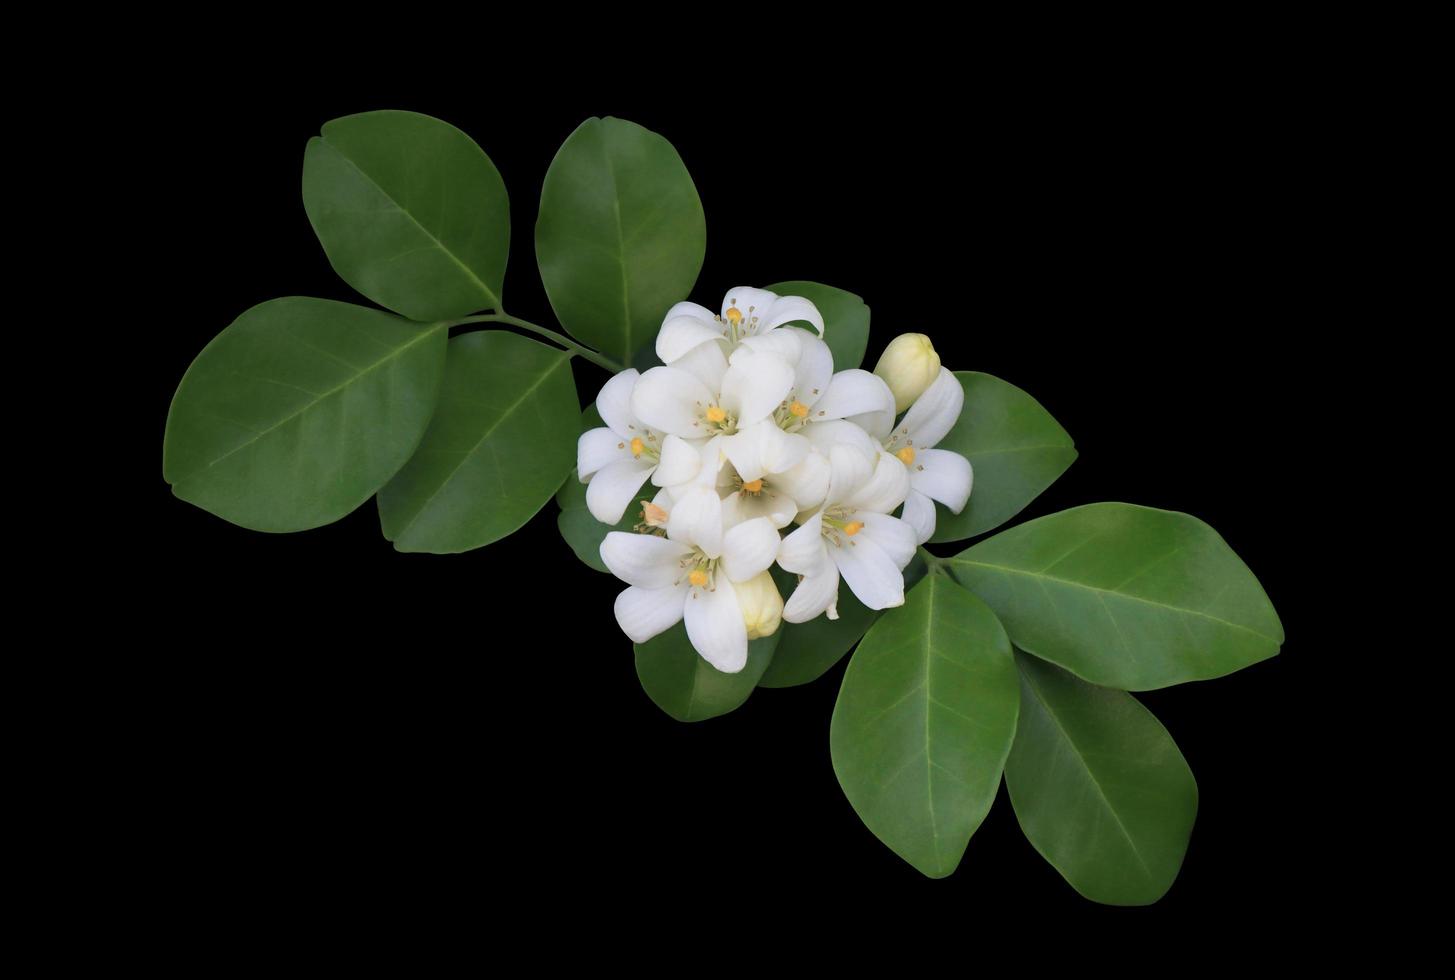 Orange Jasmine or Murraya paniculata flowers. Close up white exotic flowers bouquet on green leaf isolated on black background. Top view flower bunch. photo